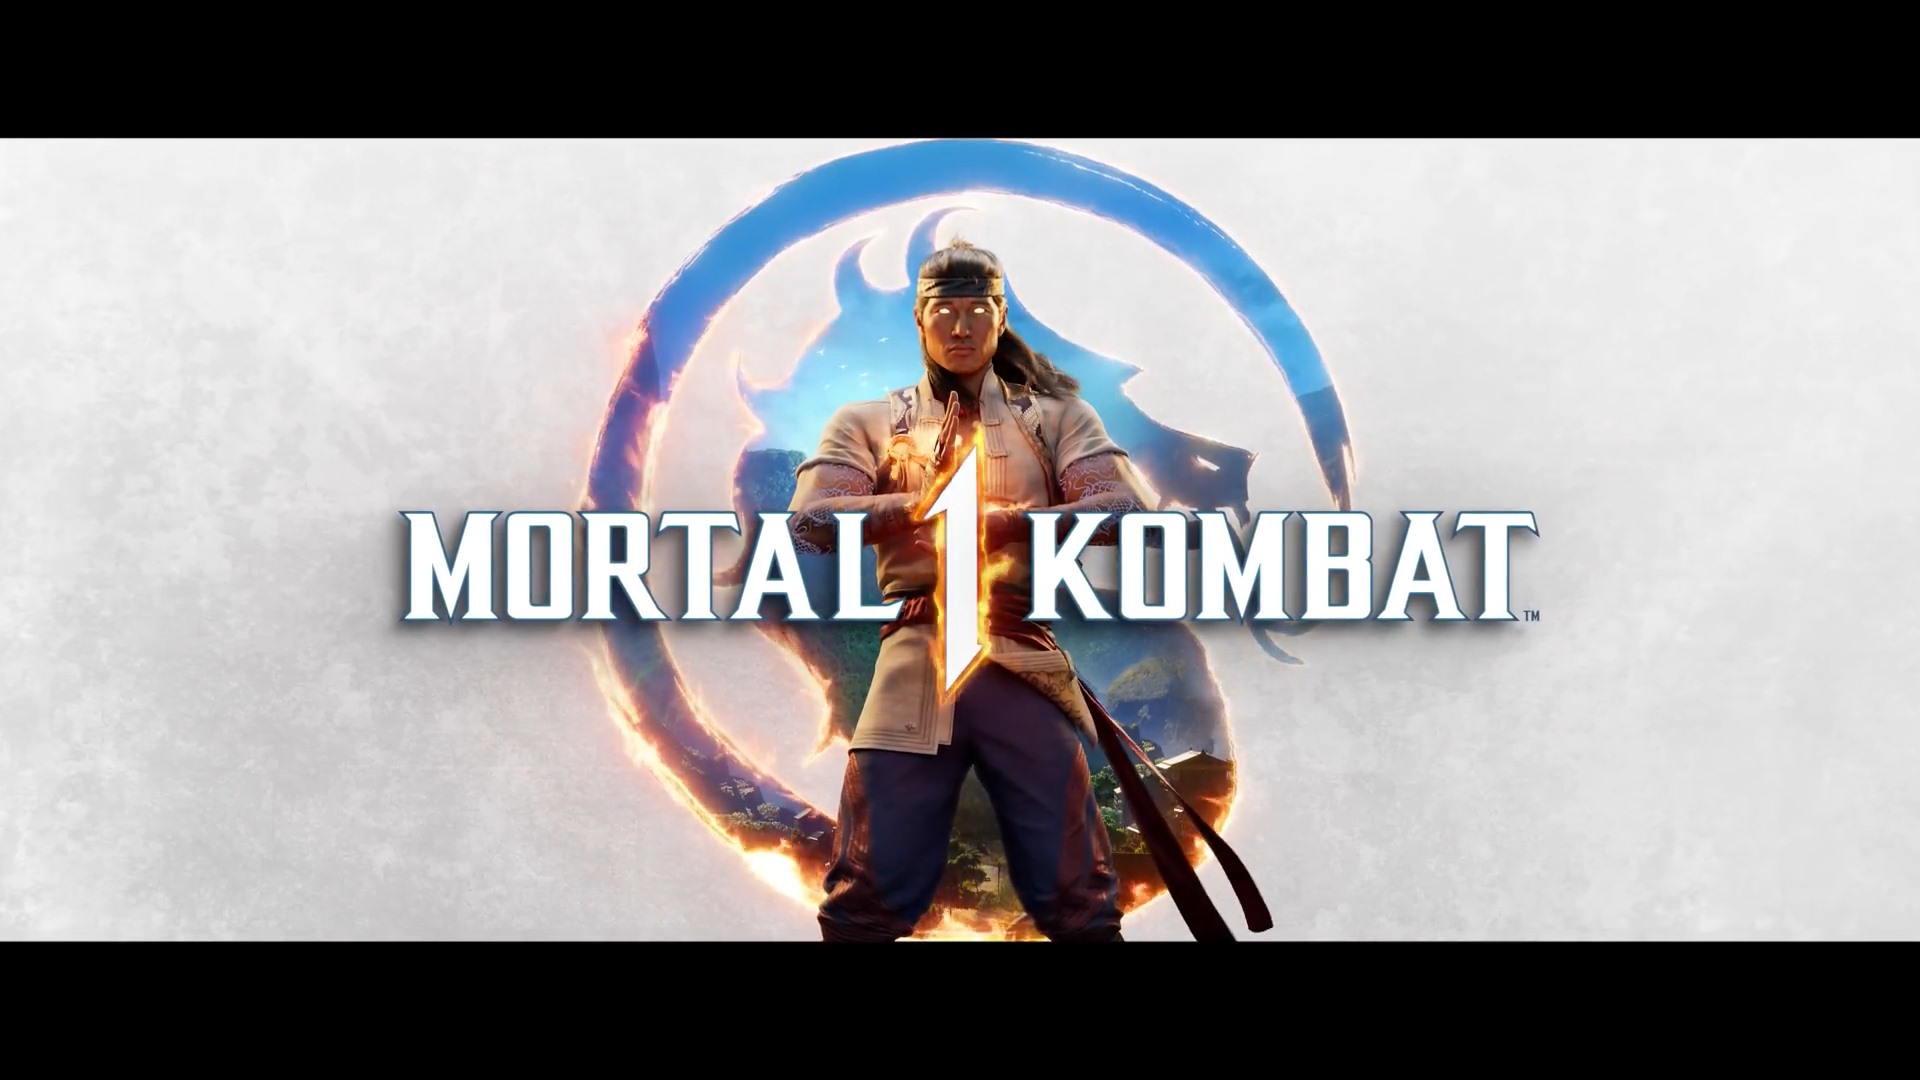 Mortal Kombat 1 recently released a new trailer featuring Dave Bautista.